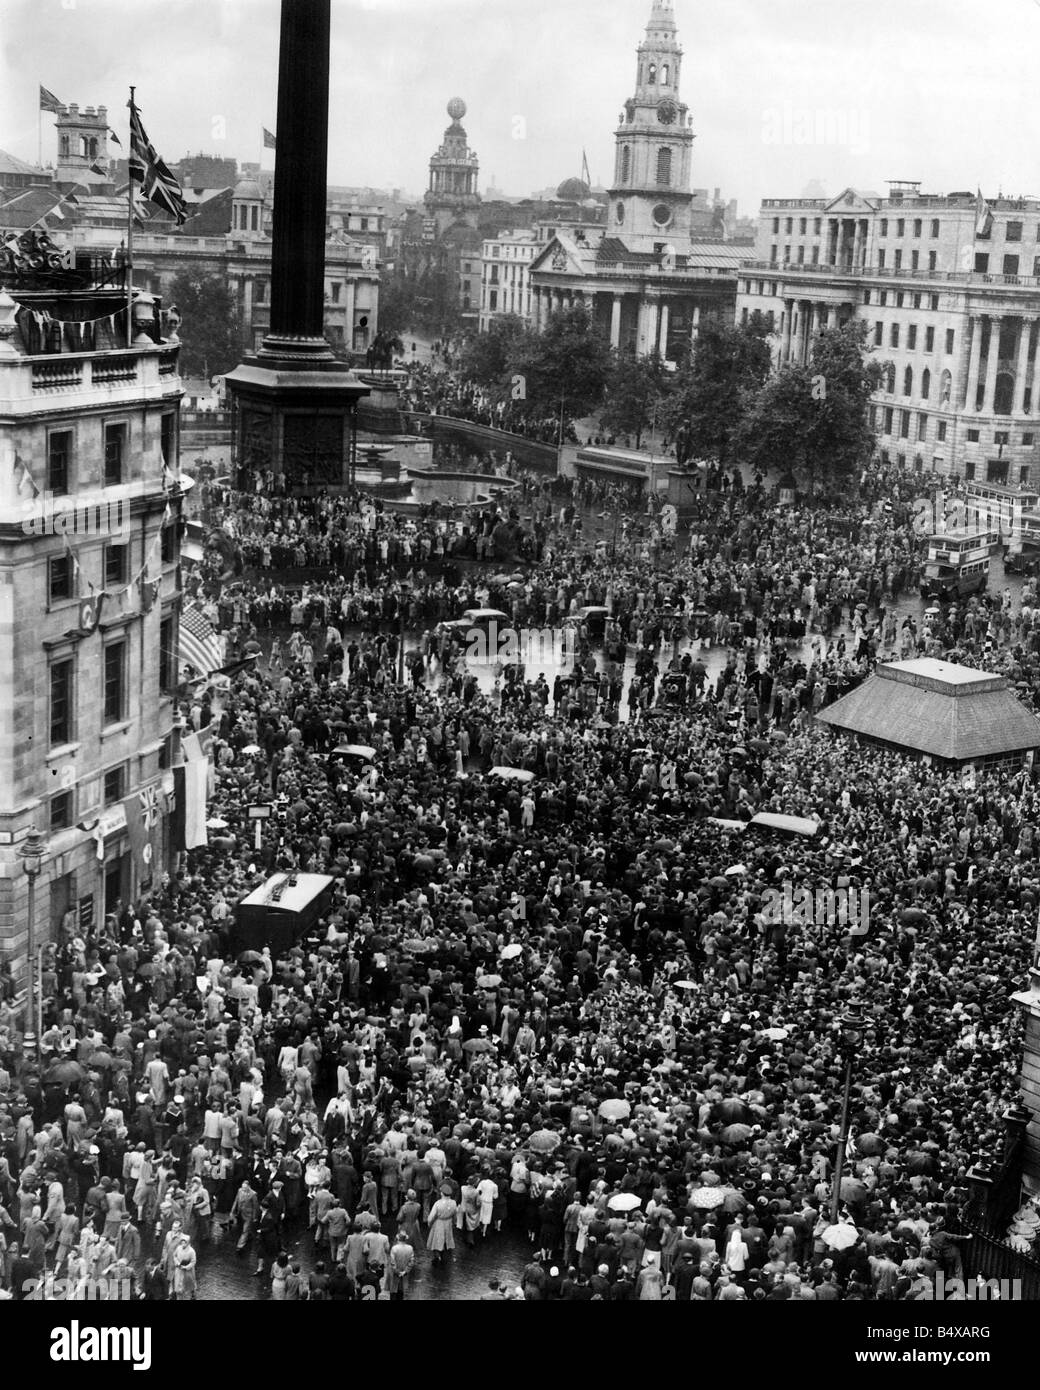 V J Day Trafalgar Square August 1945 The crowd in Trafalgar Square listen to dance music as they sit arounds Nelson s Column the Lions and the fountains Stock Photo